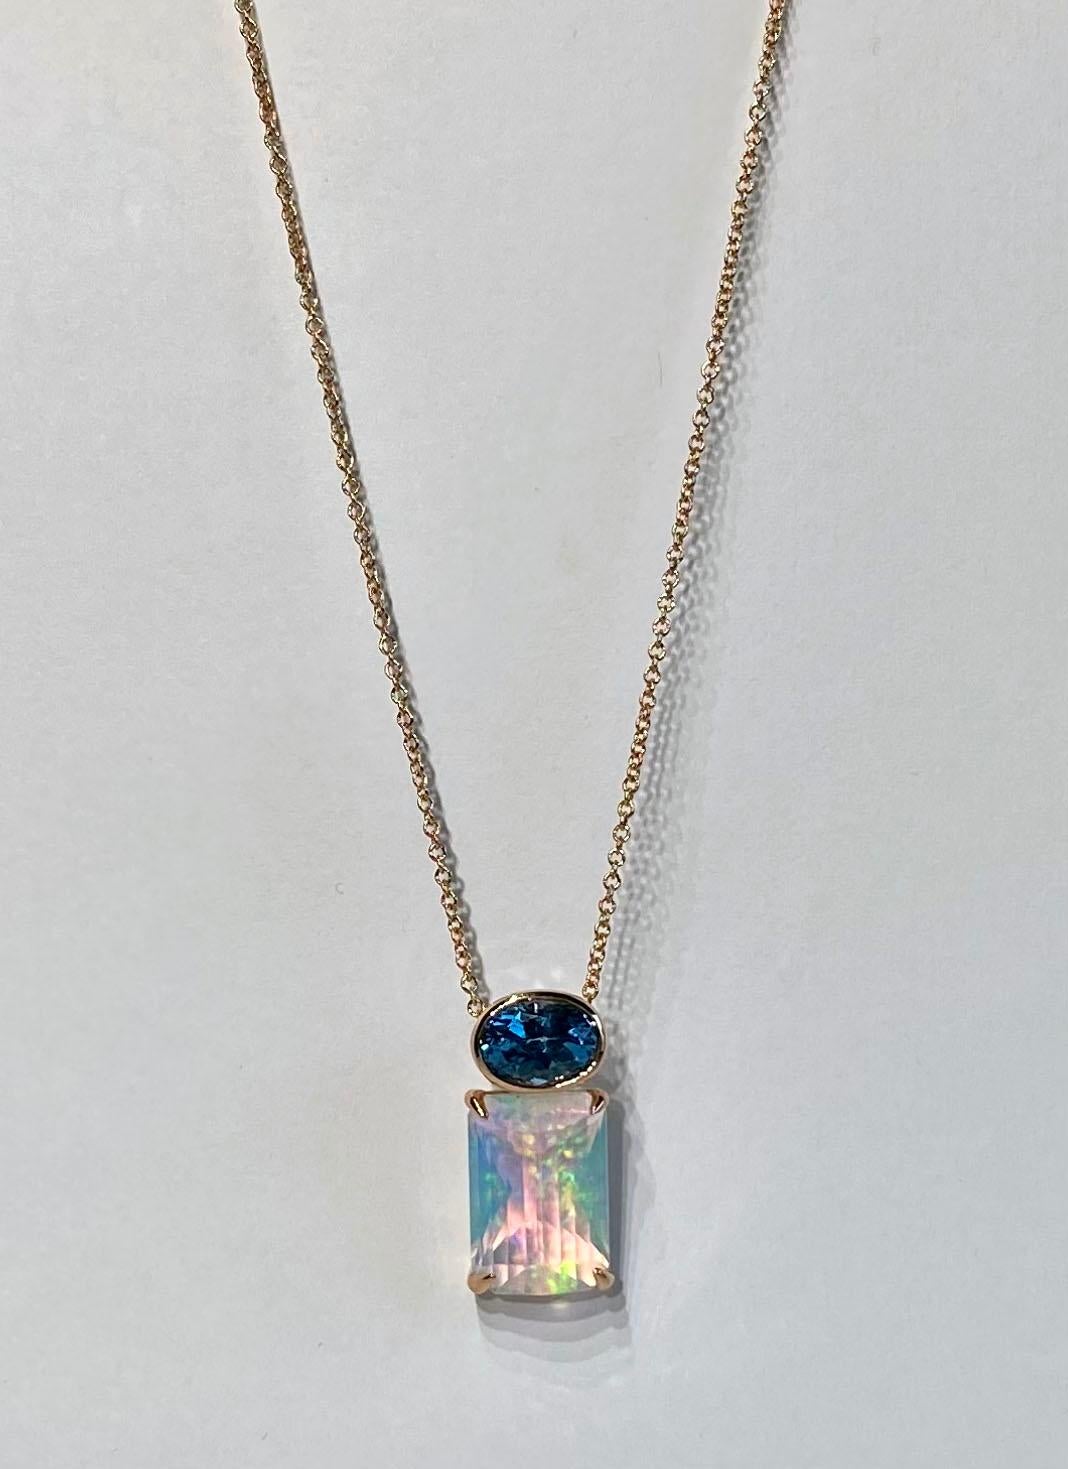 A 14kt Rose Gold Pendant set with Topaz and Opal For Sale 3